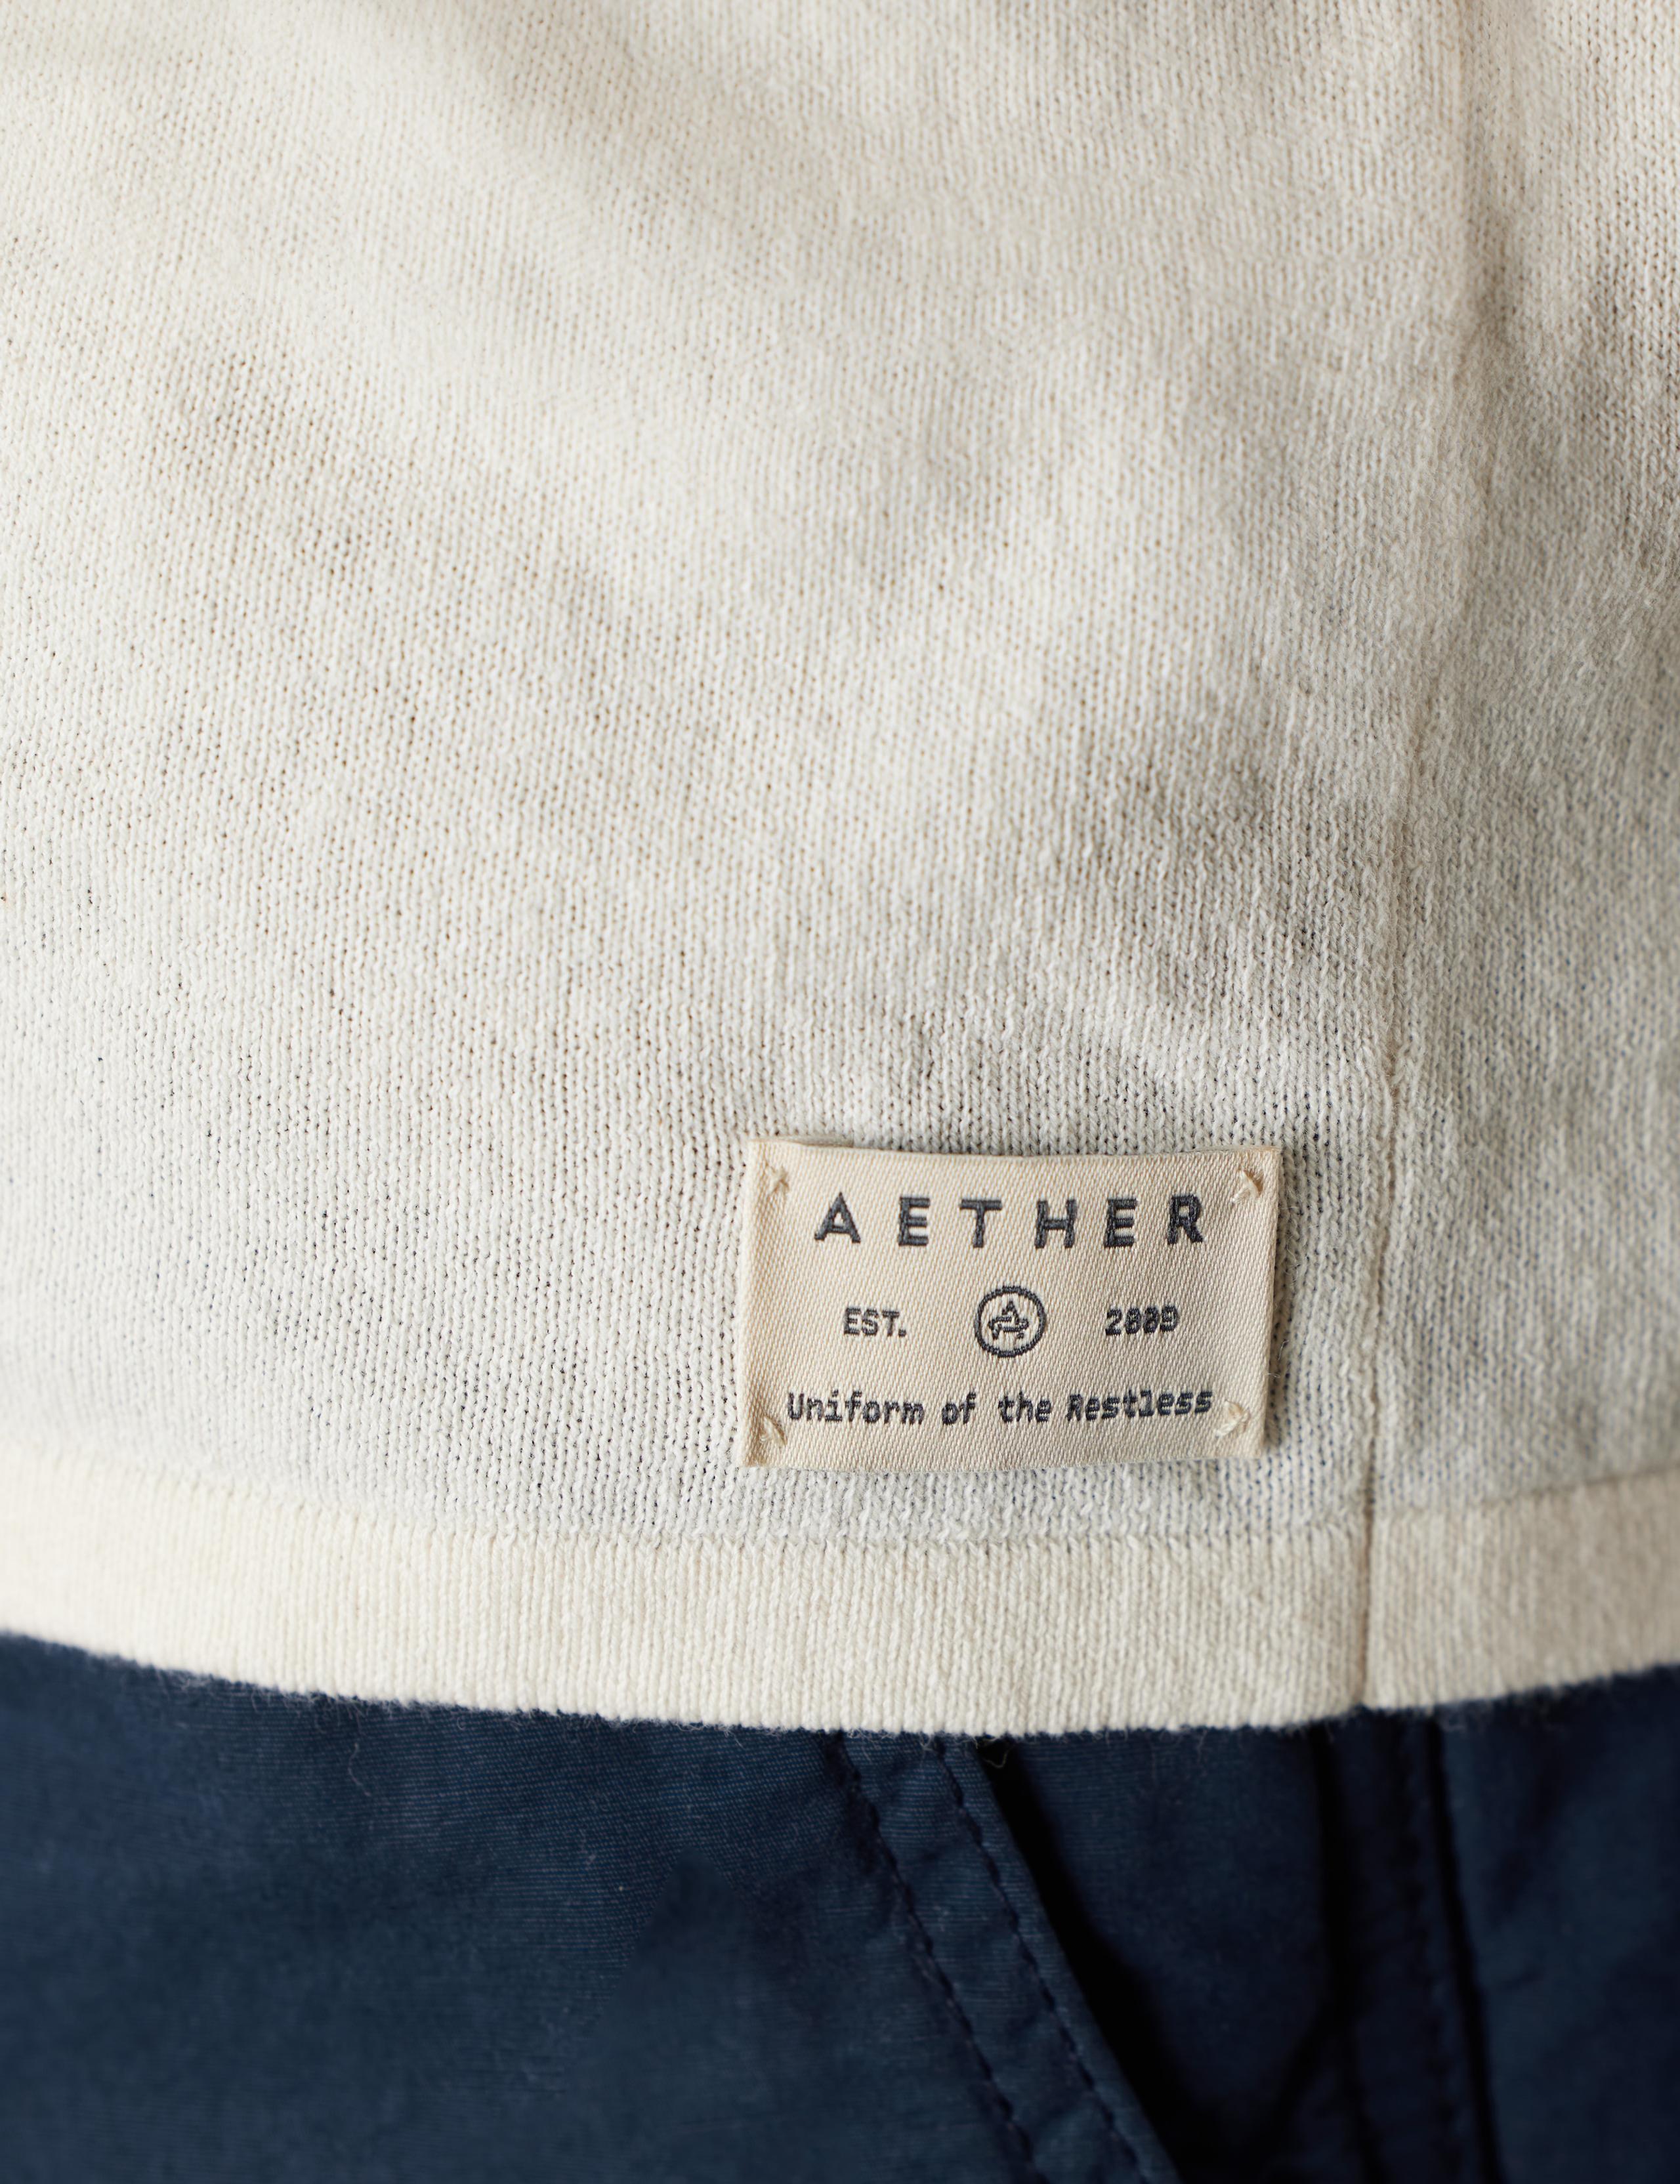 AETHER Label positioned at the hip of the Aero Sweater at the bottom.